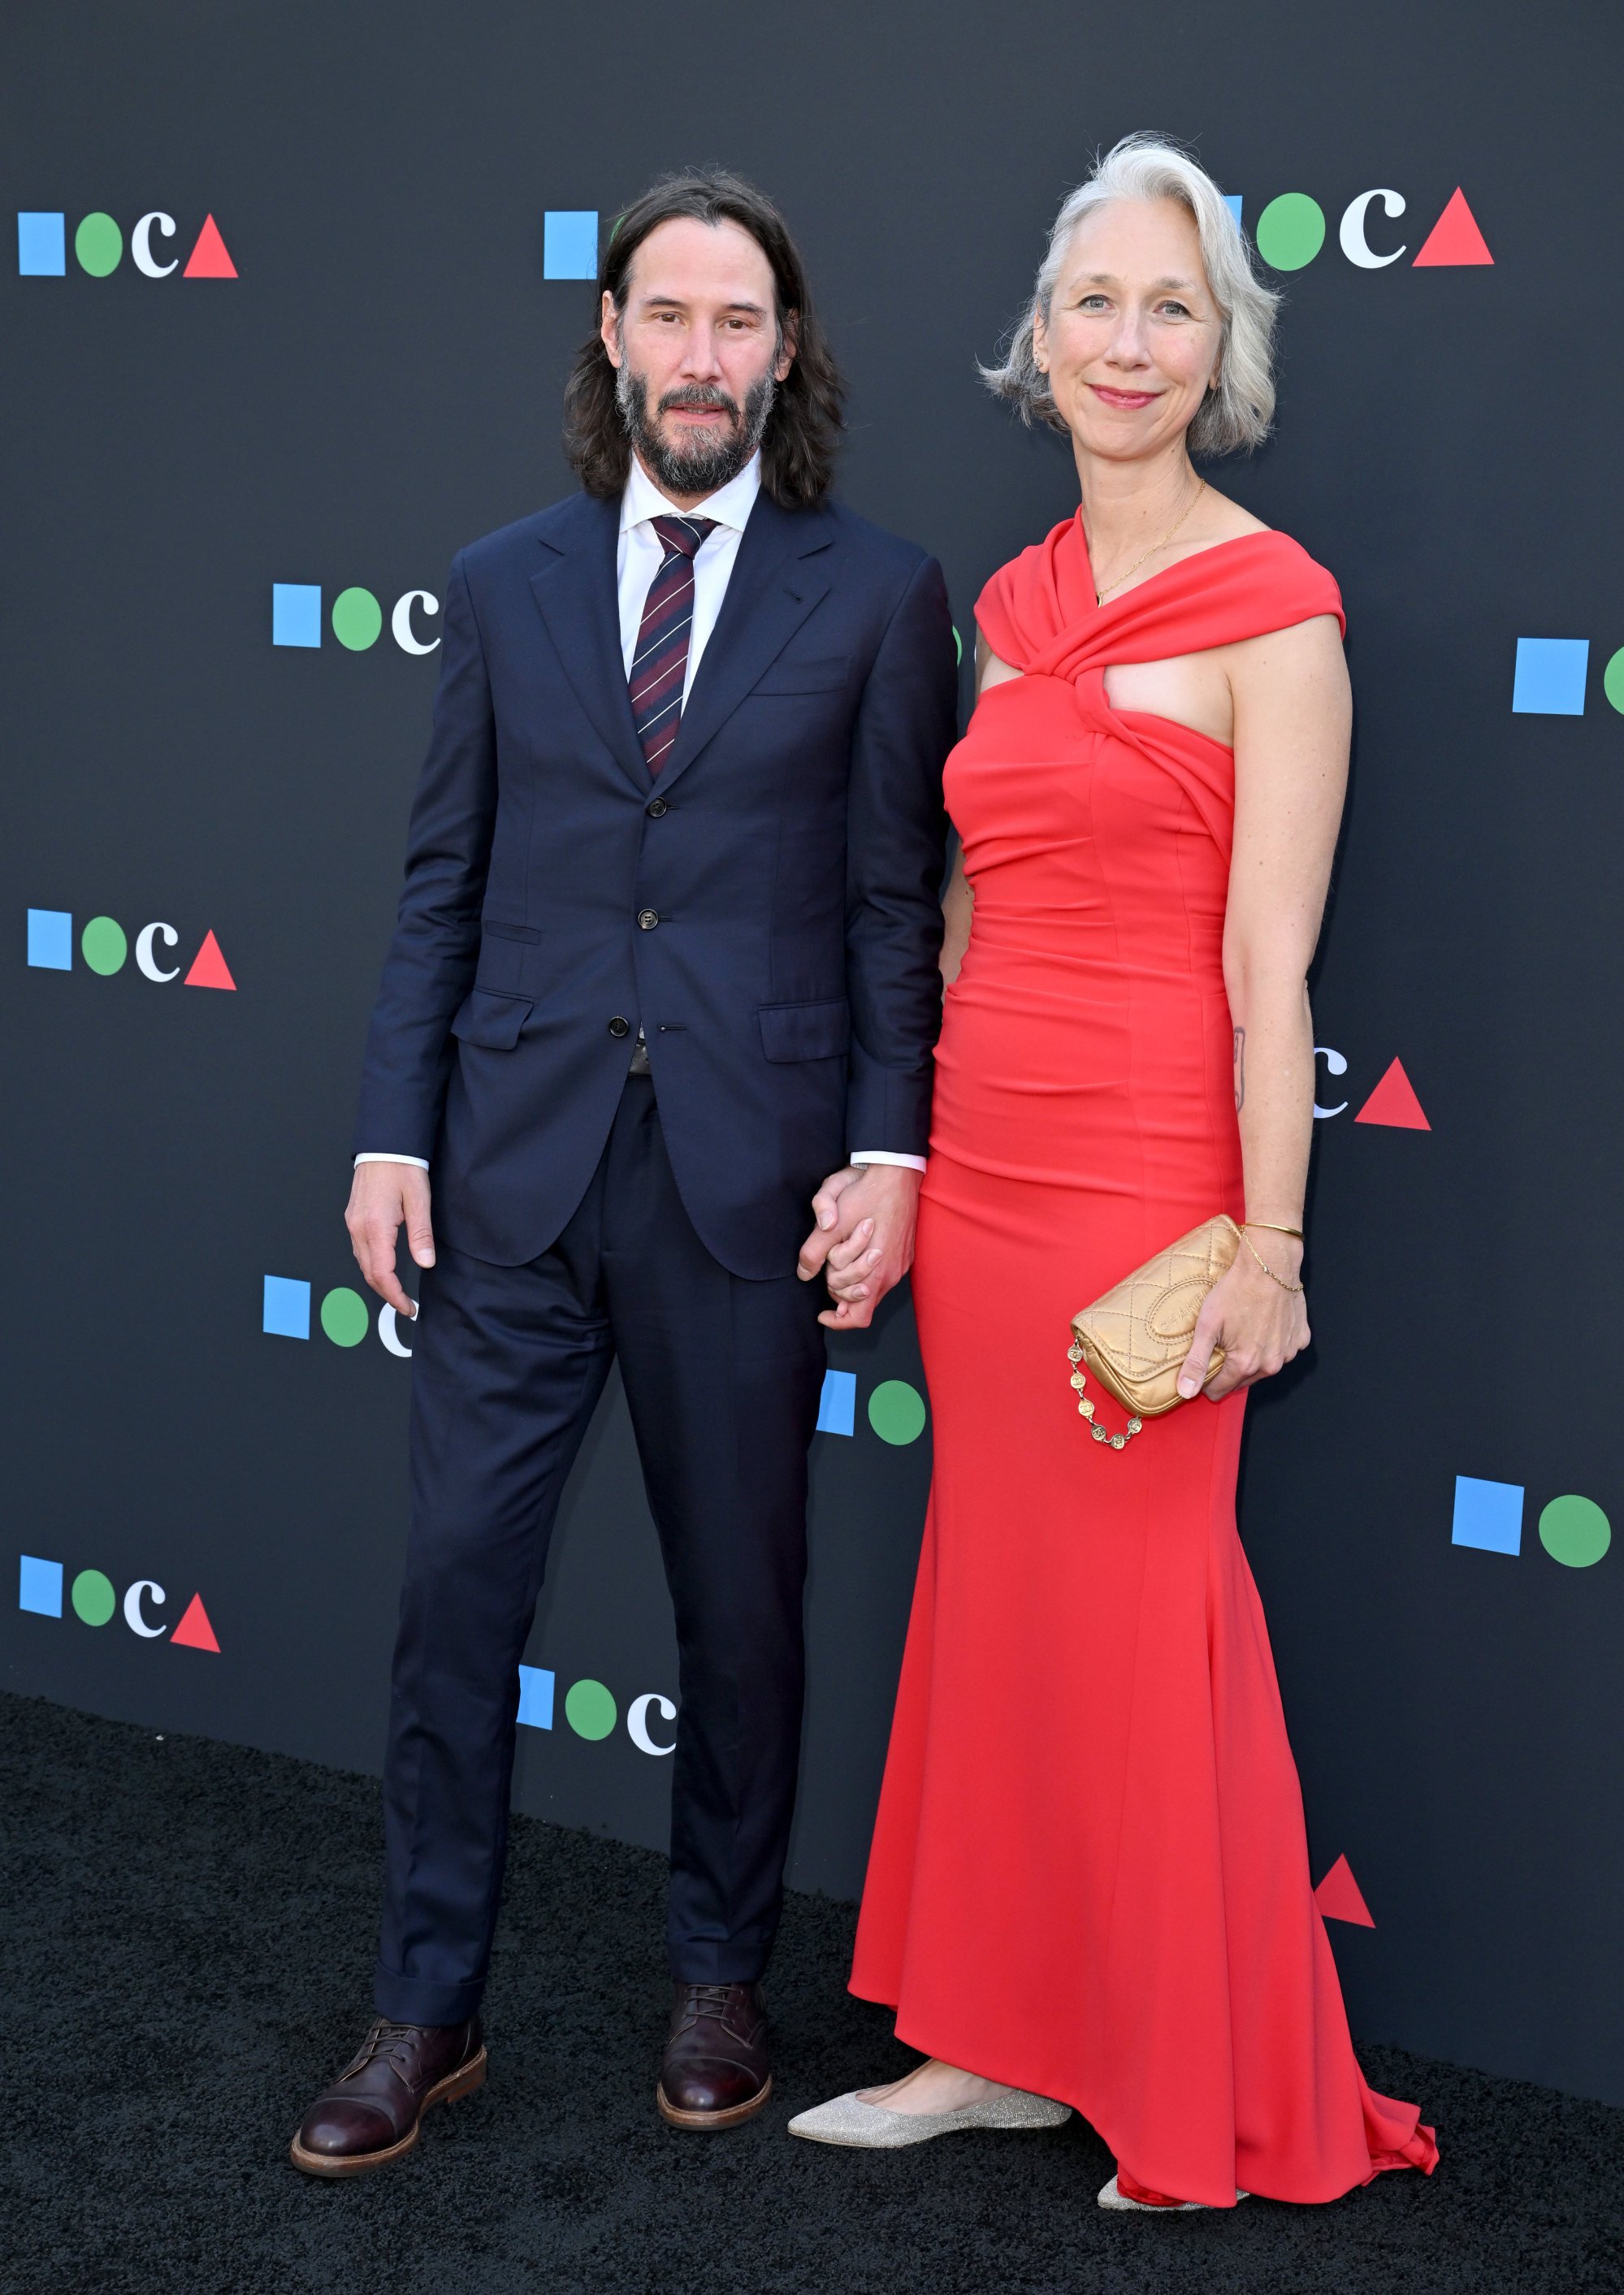 Keanu Reeves and Alexandra Grant at the Moca Gala in June 2022. Photo: Getty Images